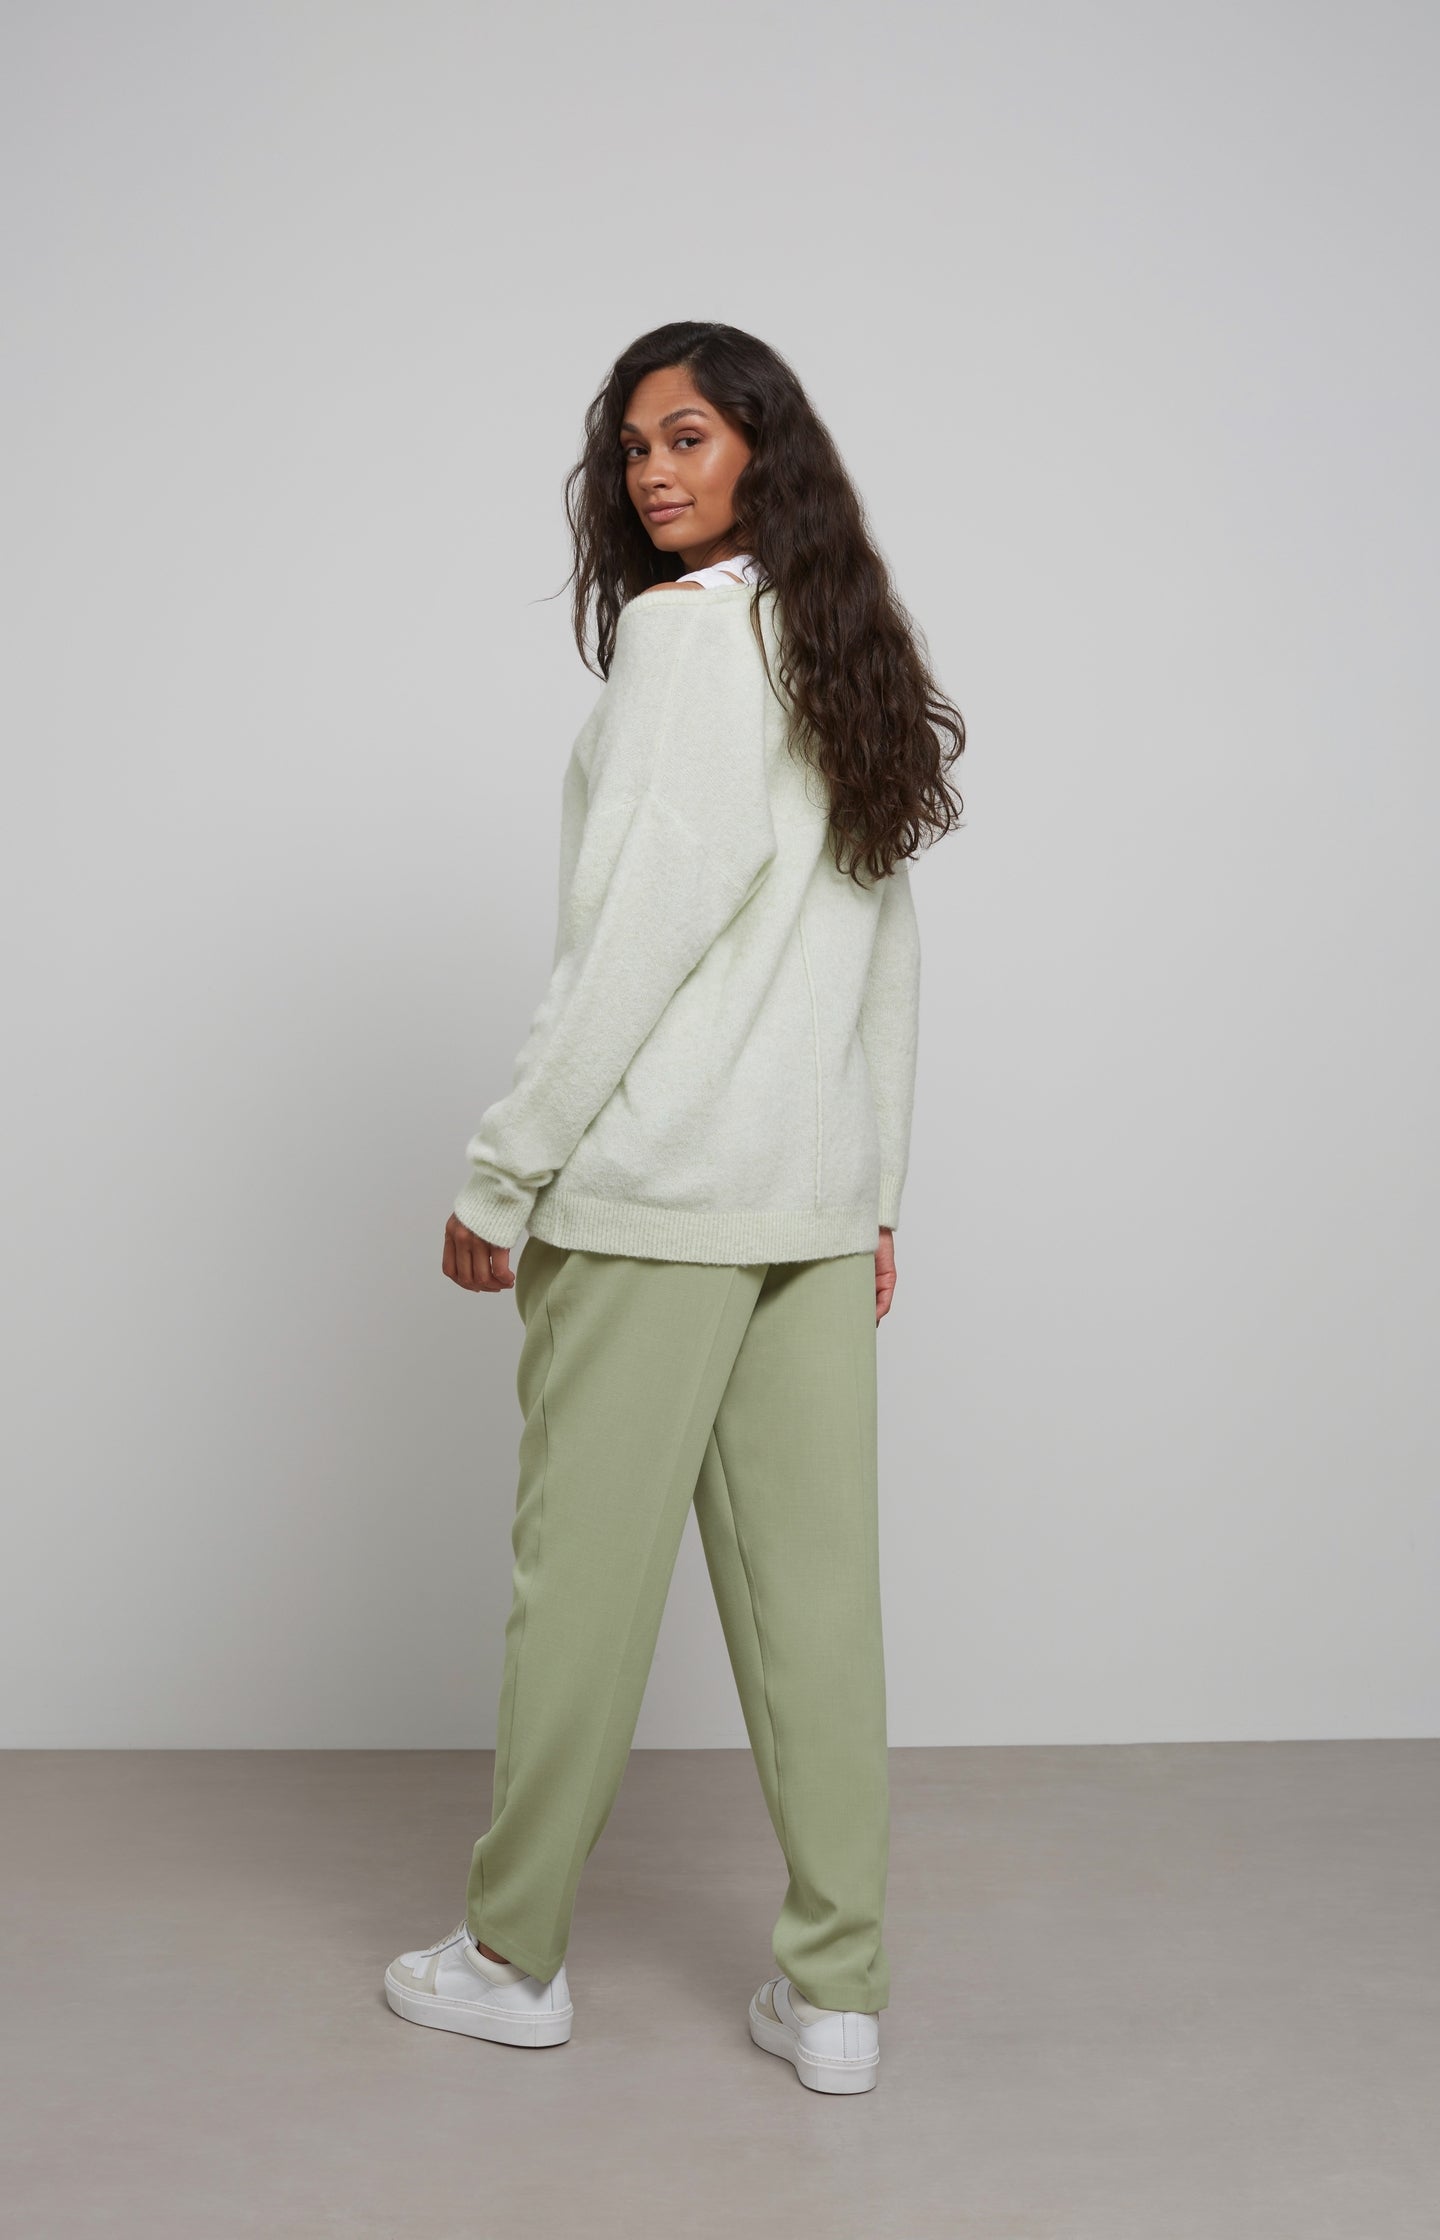 High waist trousers with pleated details and side pockets - Type: lookbook